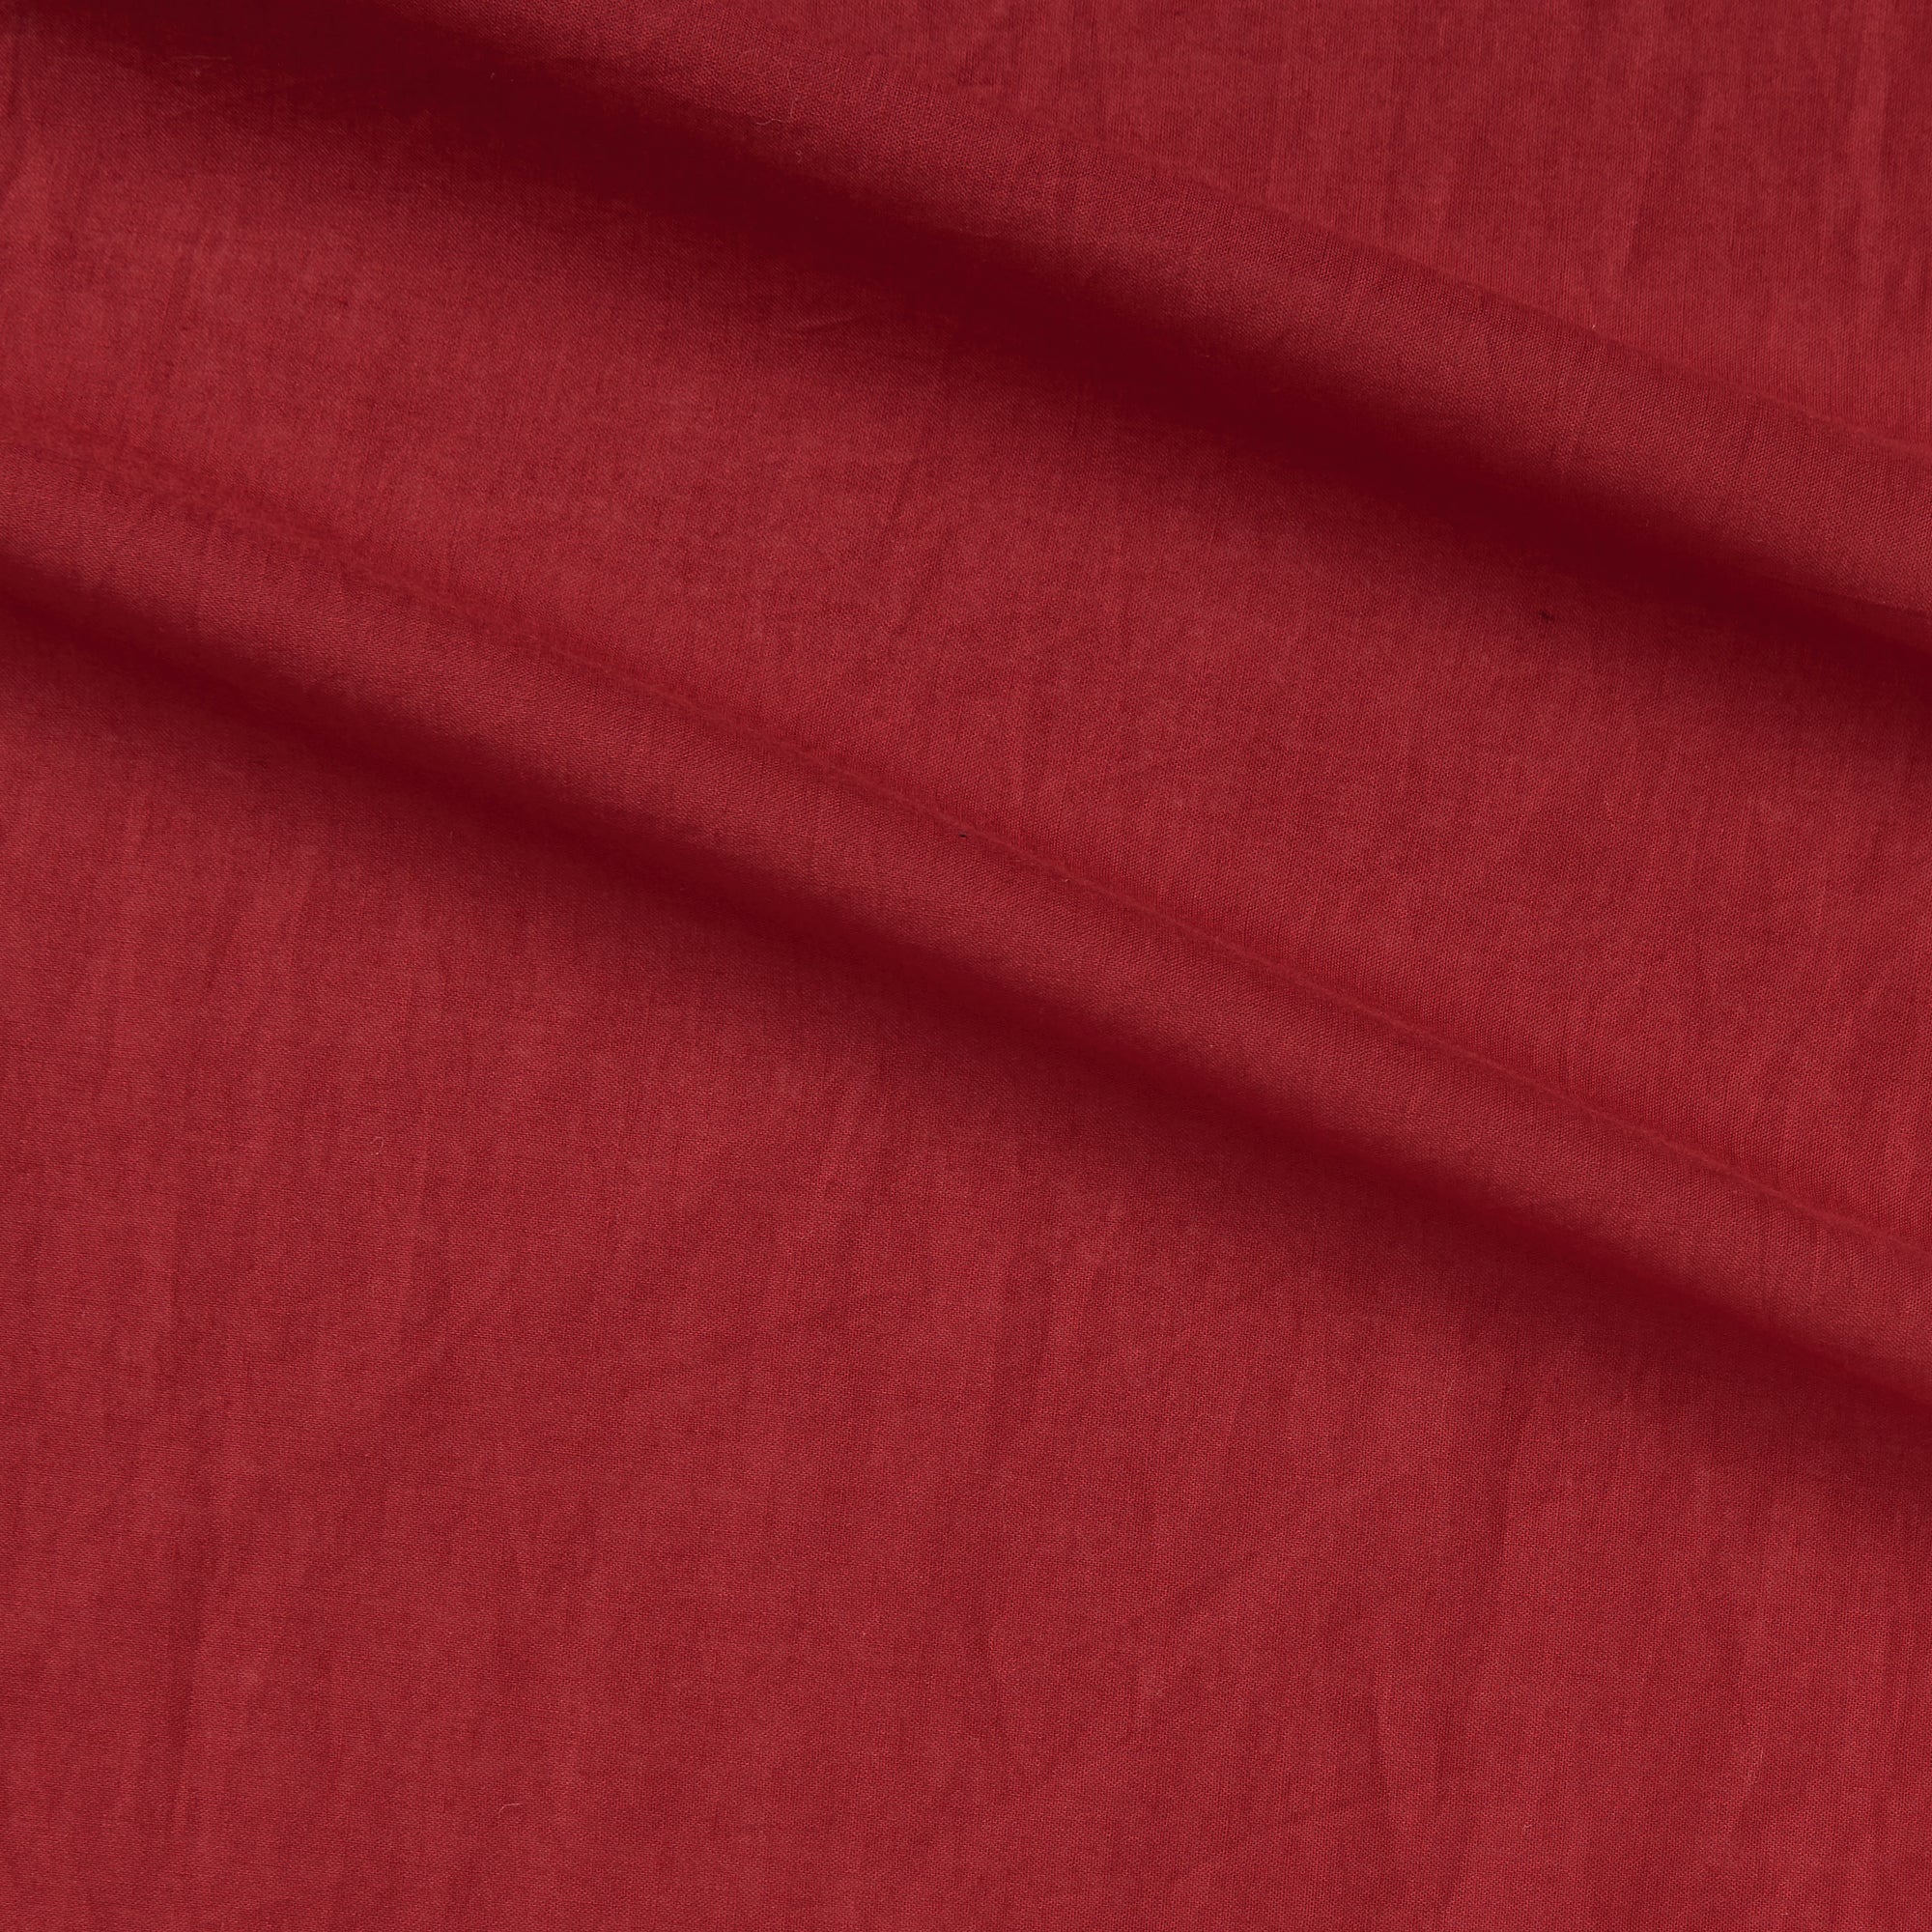 Haitana displaying the Red color version of a Fine light weight breathable soft smooth pure cotton voile